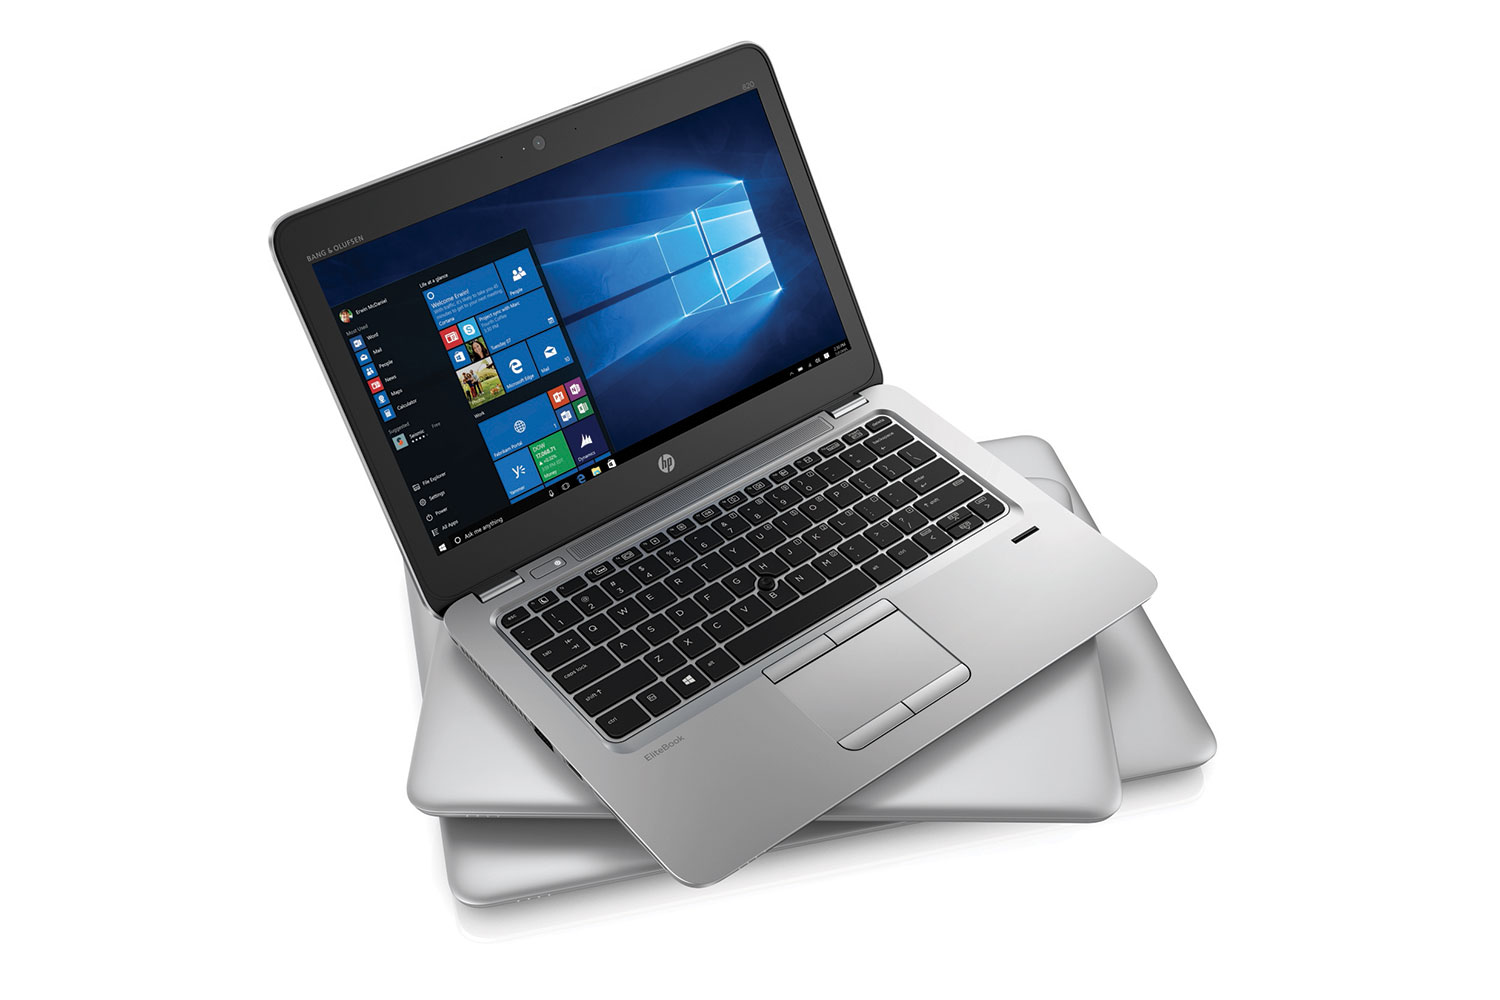 hps new elitebook folio is a half inch thick laptop with 4k display hp 800 g3 series hp20150911496